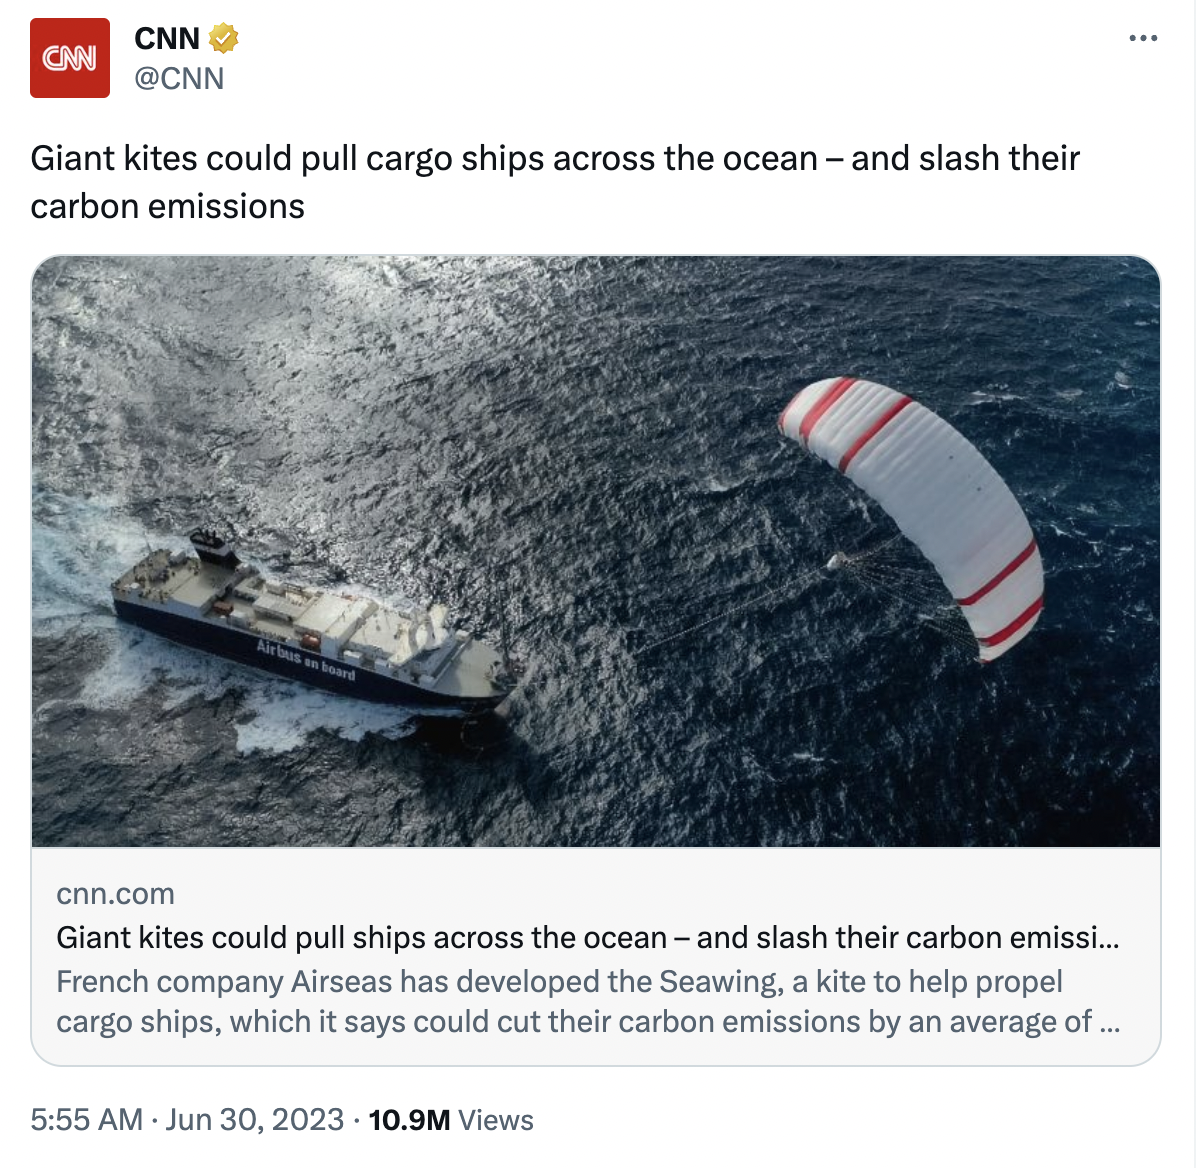 water transportation - Cnn Cnn Giant kites could pull cargo ships across the ocean and slash their carbon emissions bud cnn.com Giant kites could pull ships across the ocean and slash their carbon emissi... French company Airseas has developed the Seawing